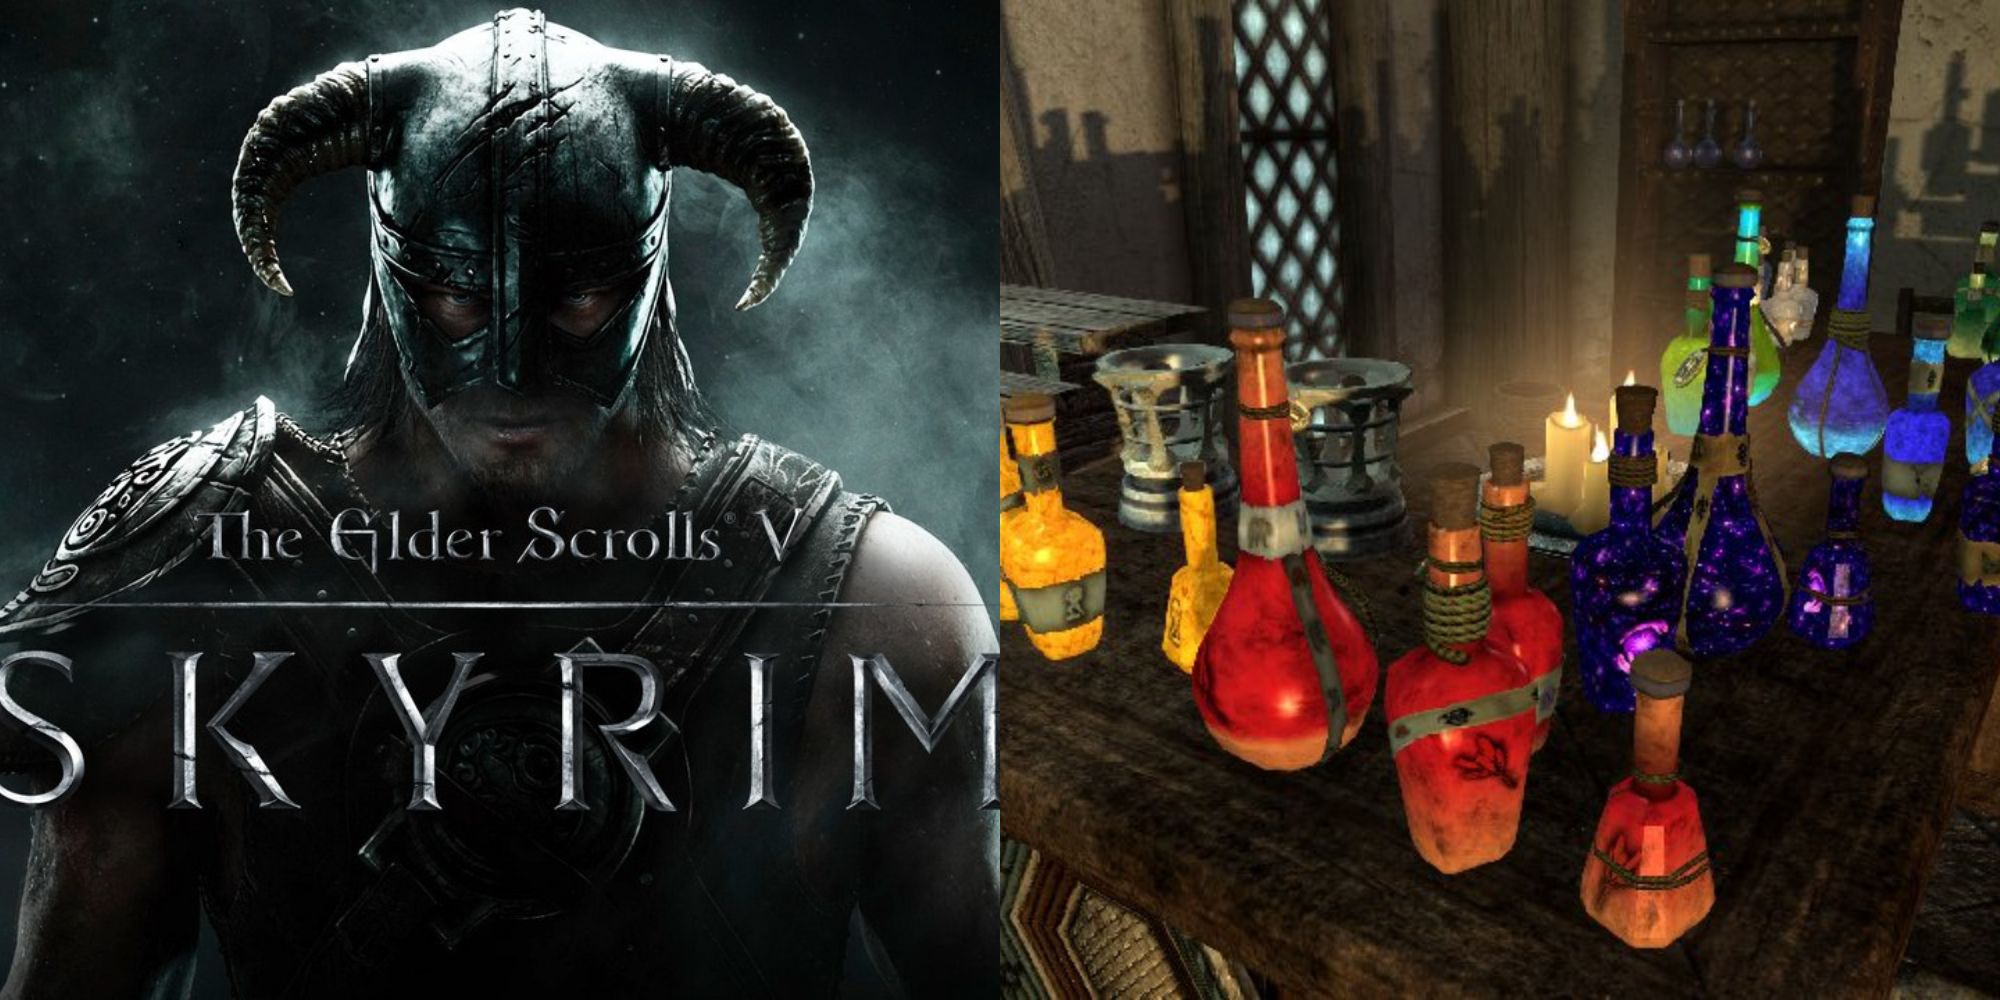 Split image showing the Skyrim cover and multiple potions.